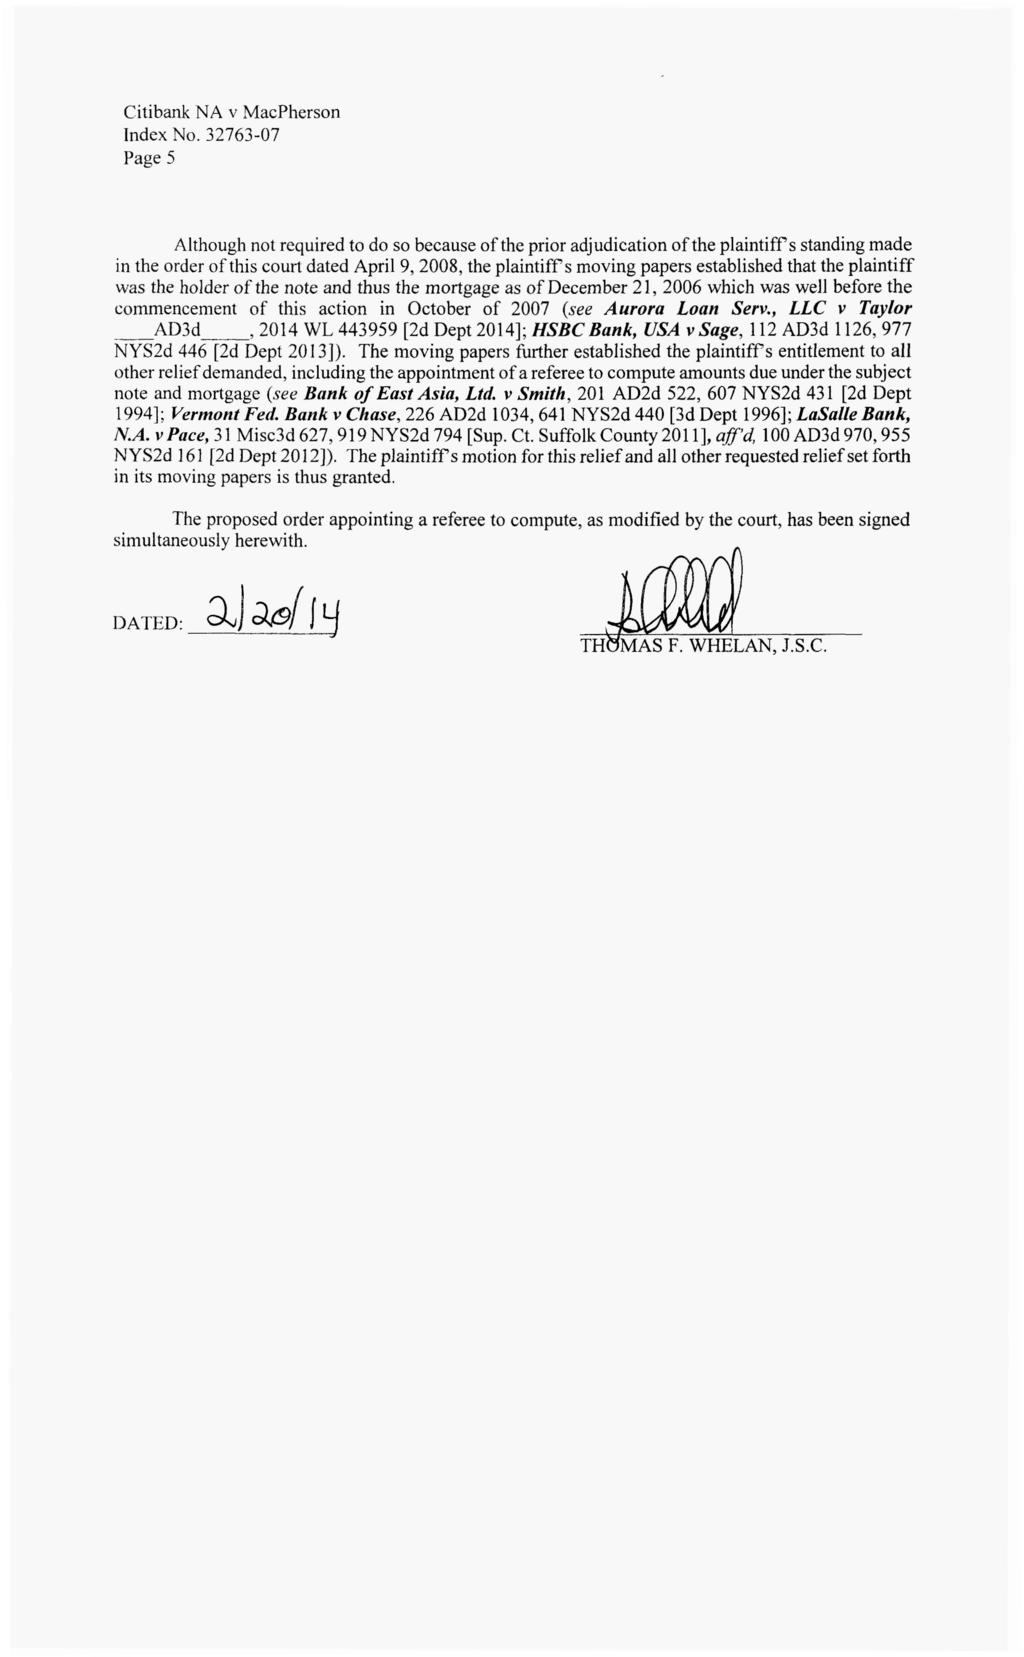 [* 5] Page 5 Although not required to do so because of the prior adjudication of the plaintiffs standing made in the order of this court dated April 9, 2008, the plaintiffs moving papers established